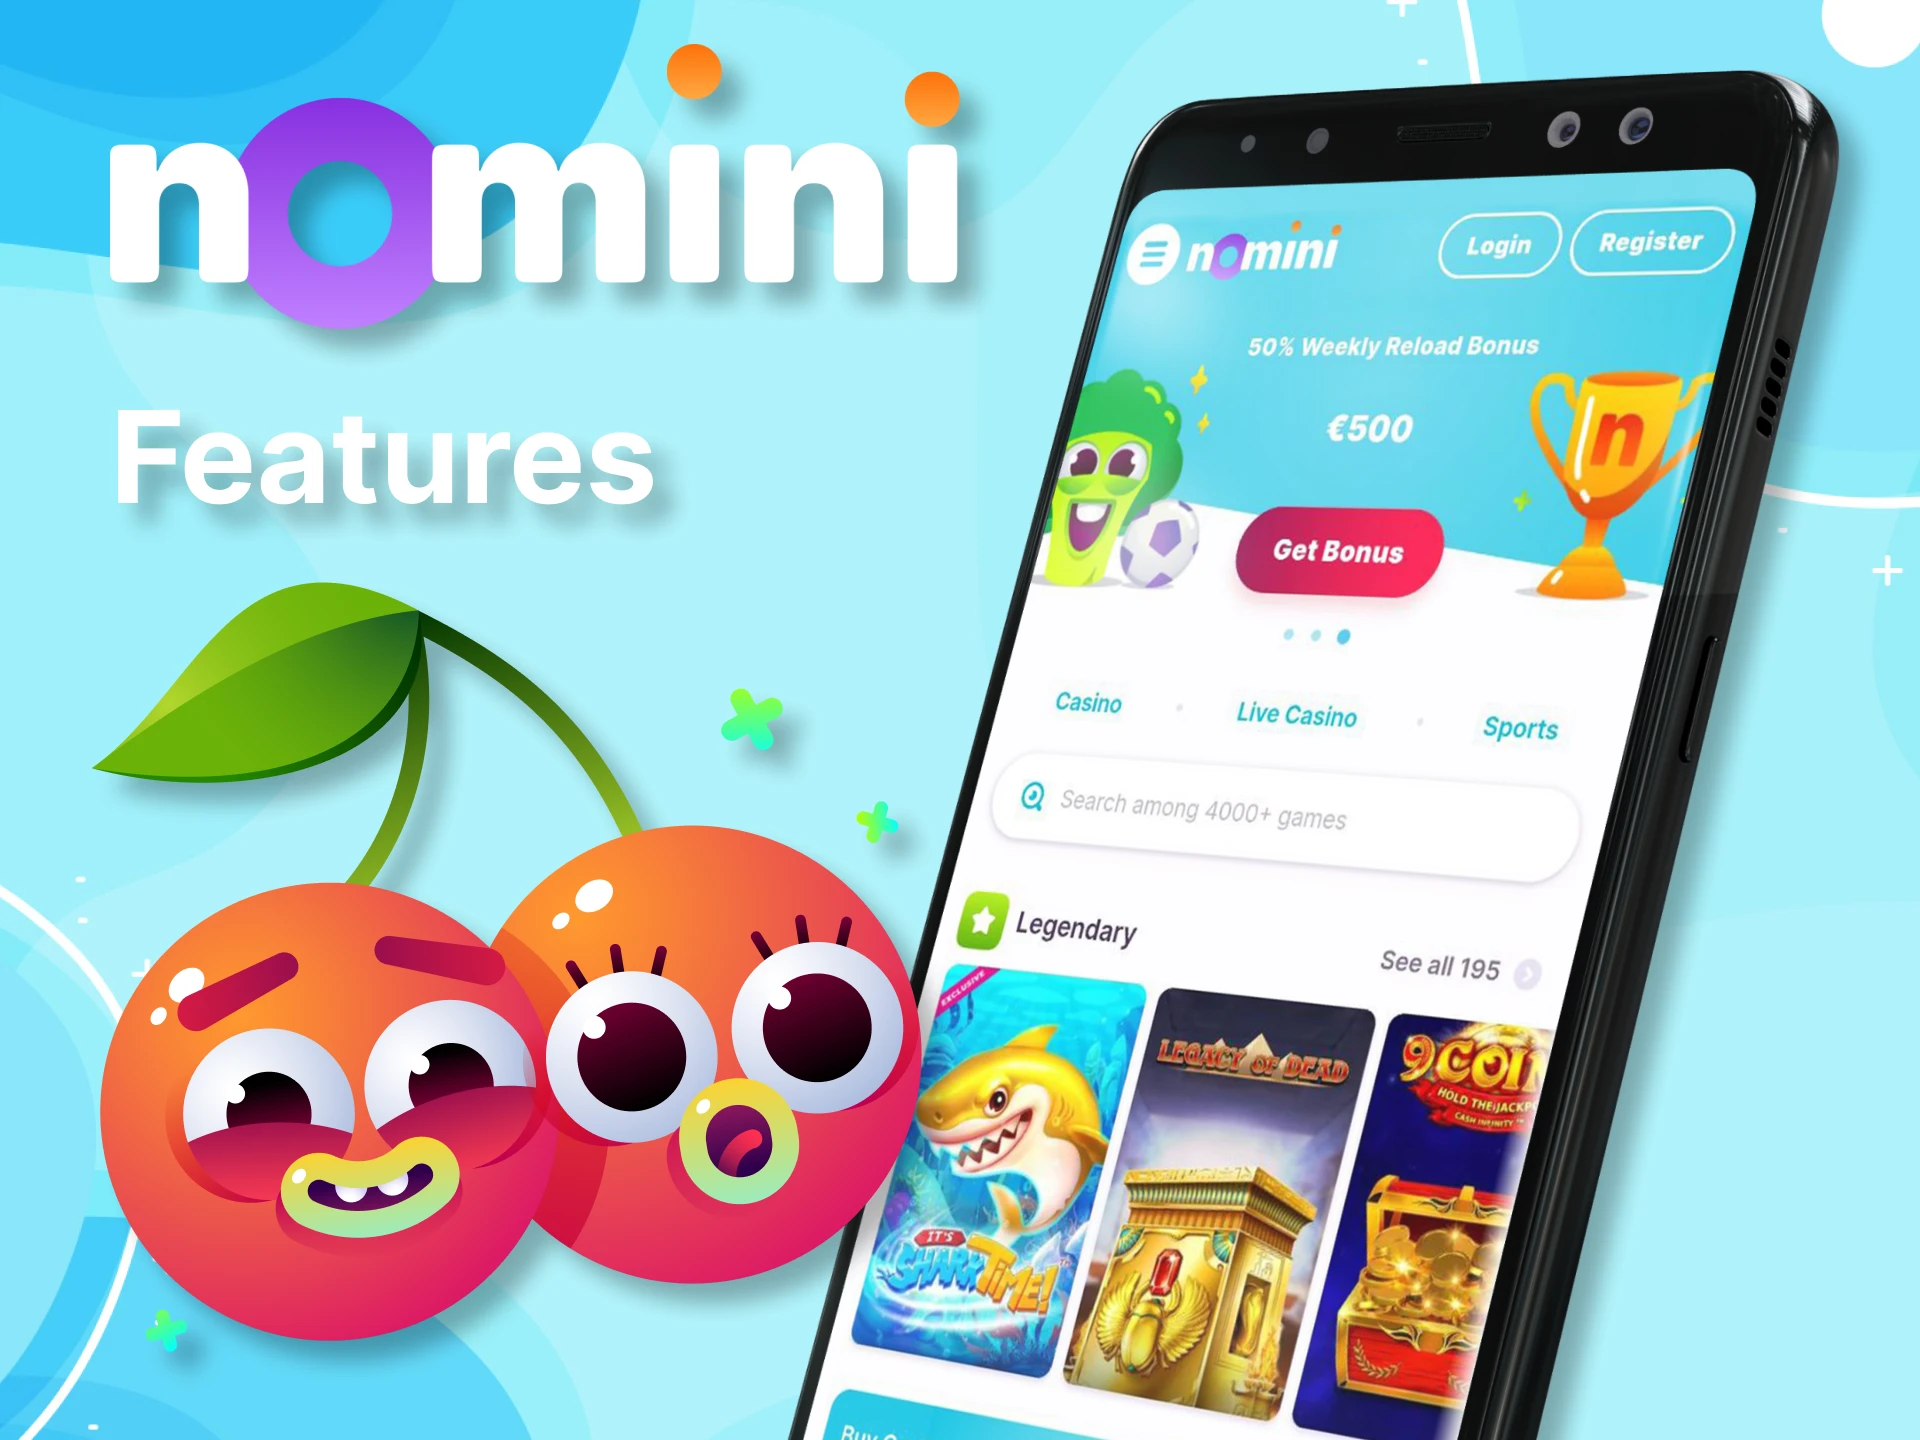 In Nomini app you will find many convenient and useful features for betting and playing casino games.